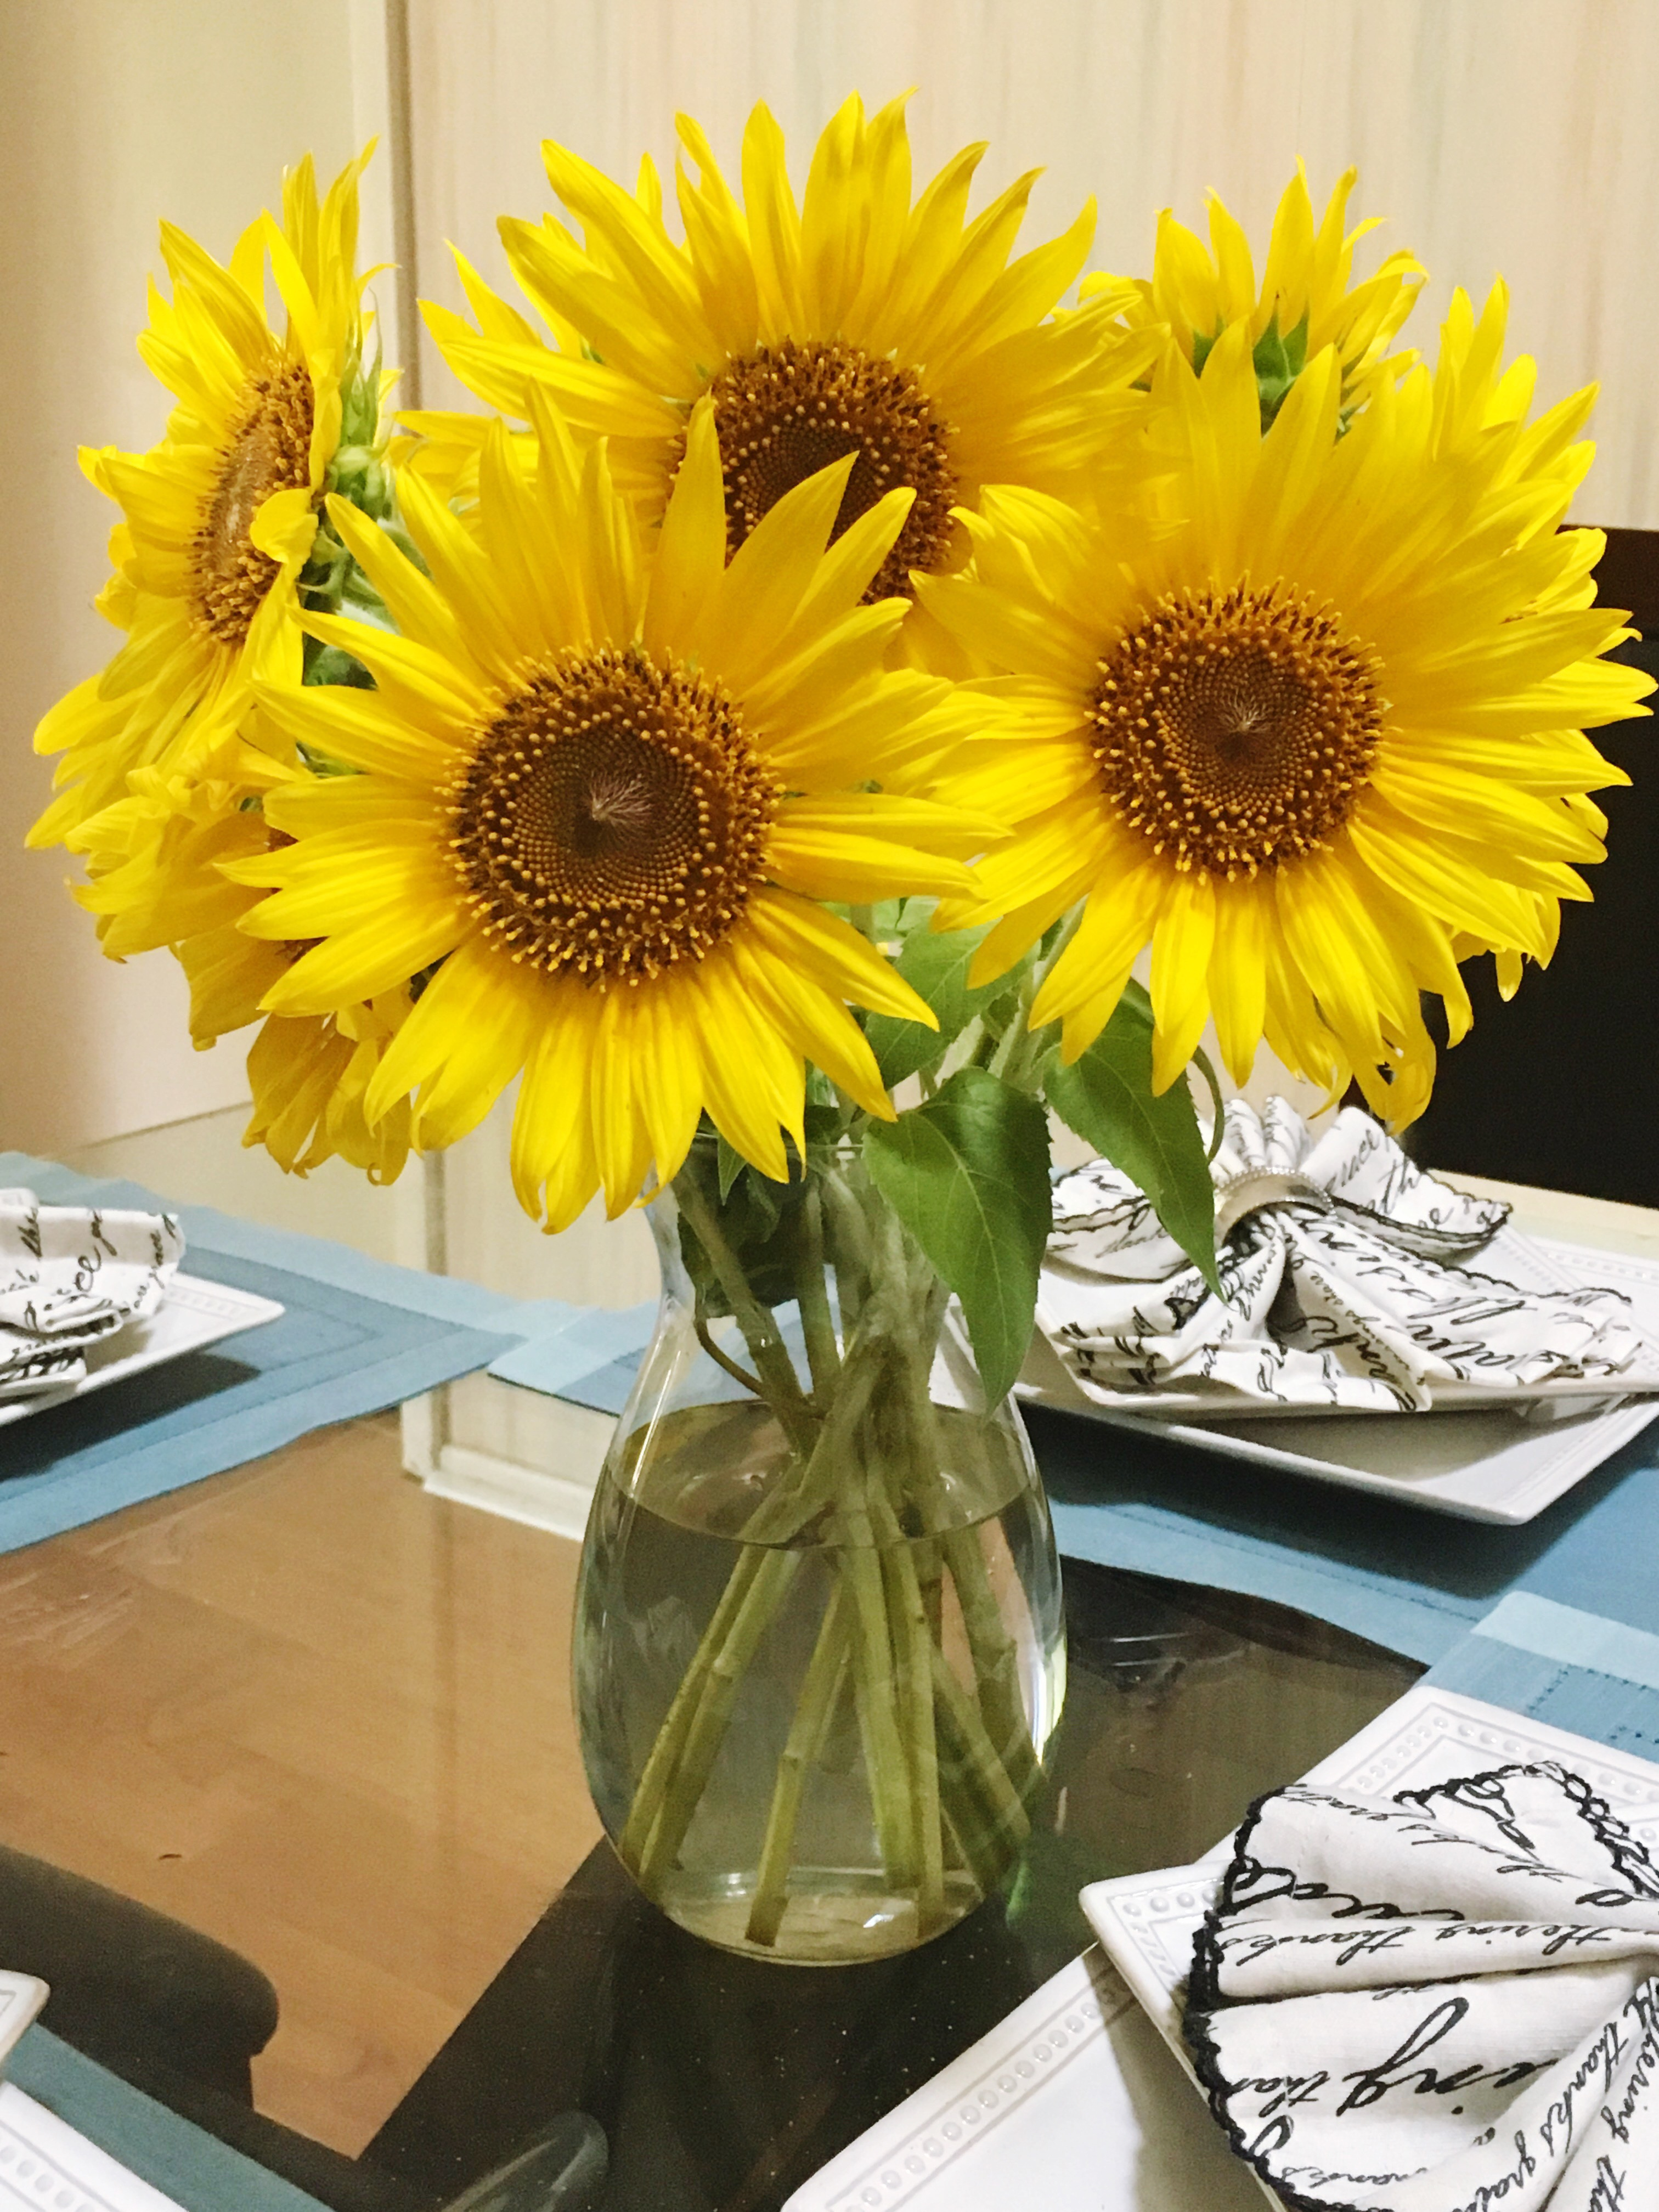 Sunflowers on the dining room table. Getty image by Tiffany Green.